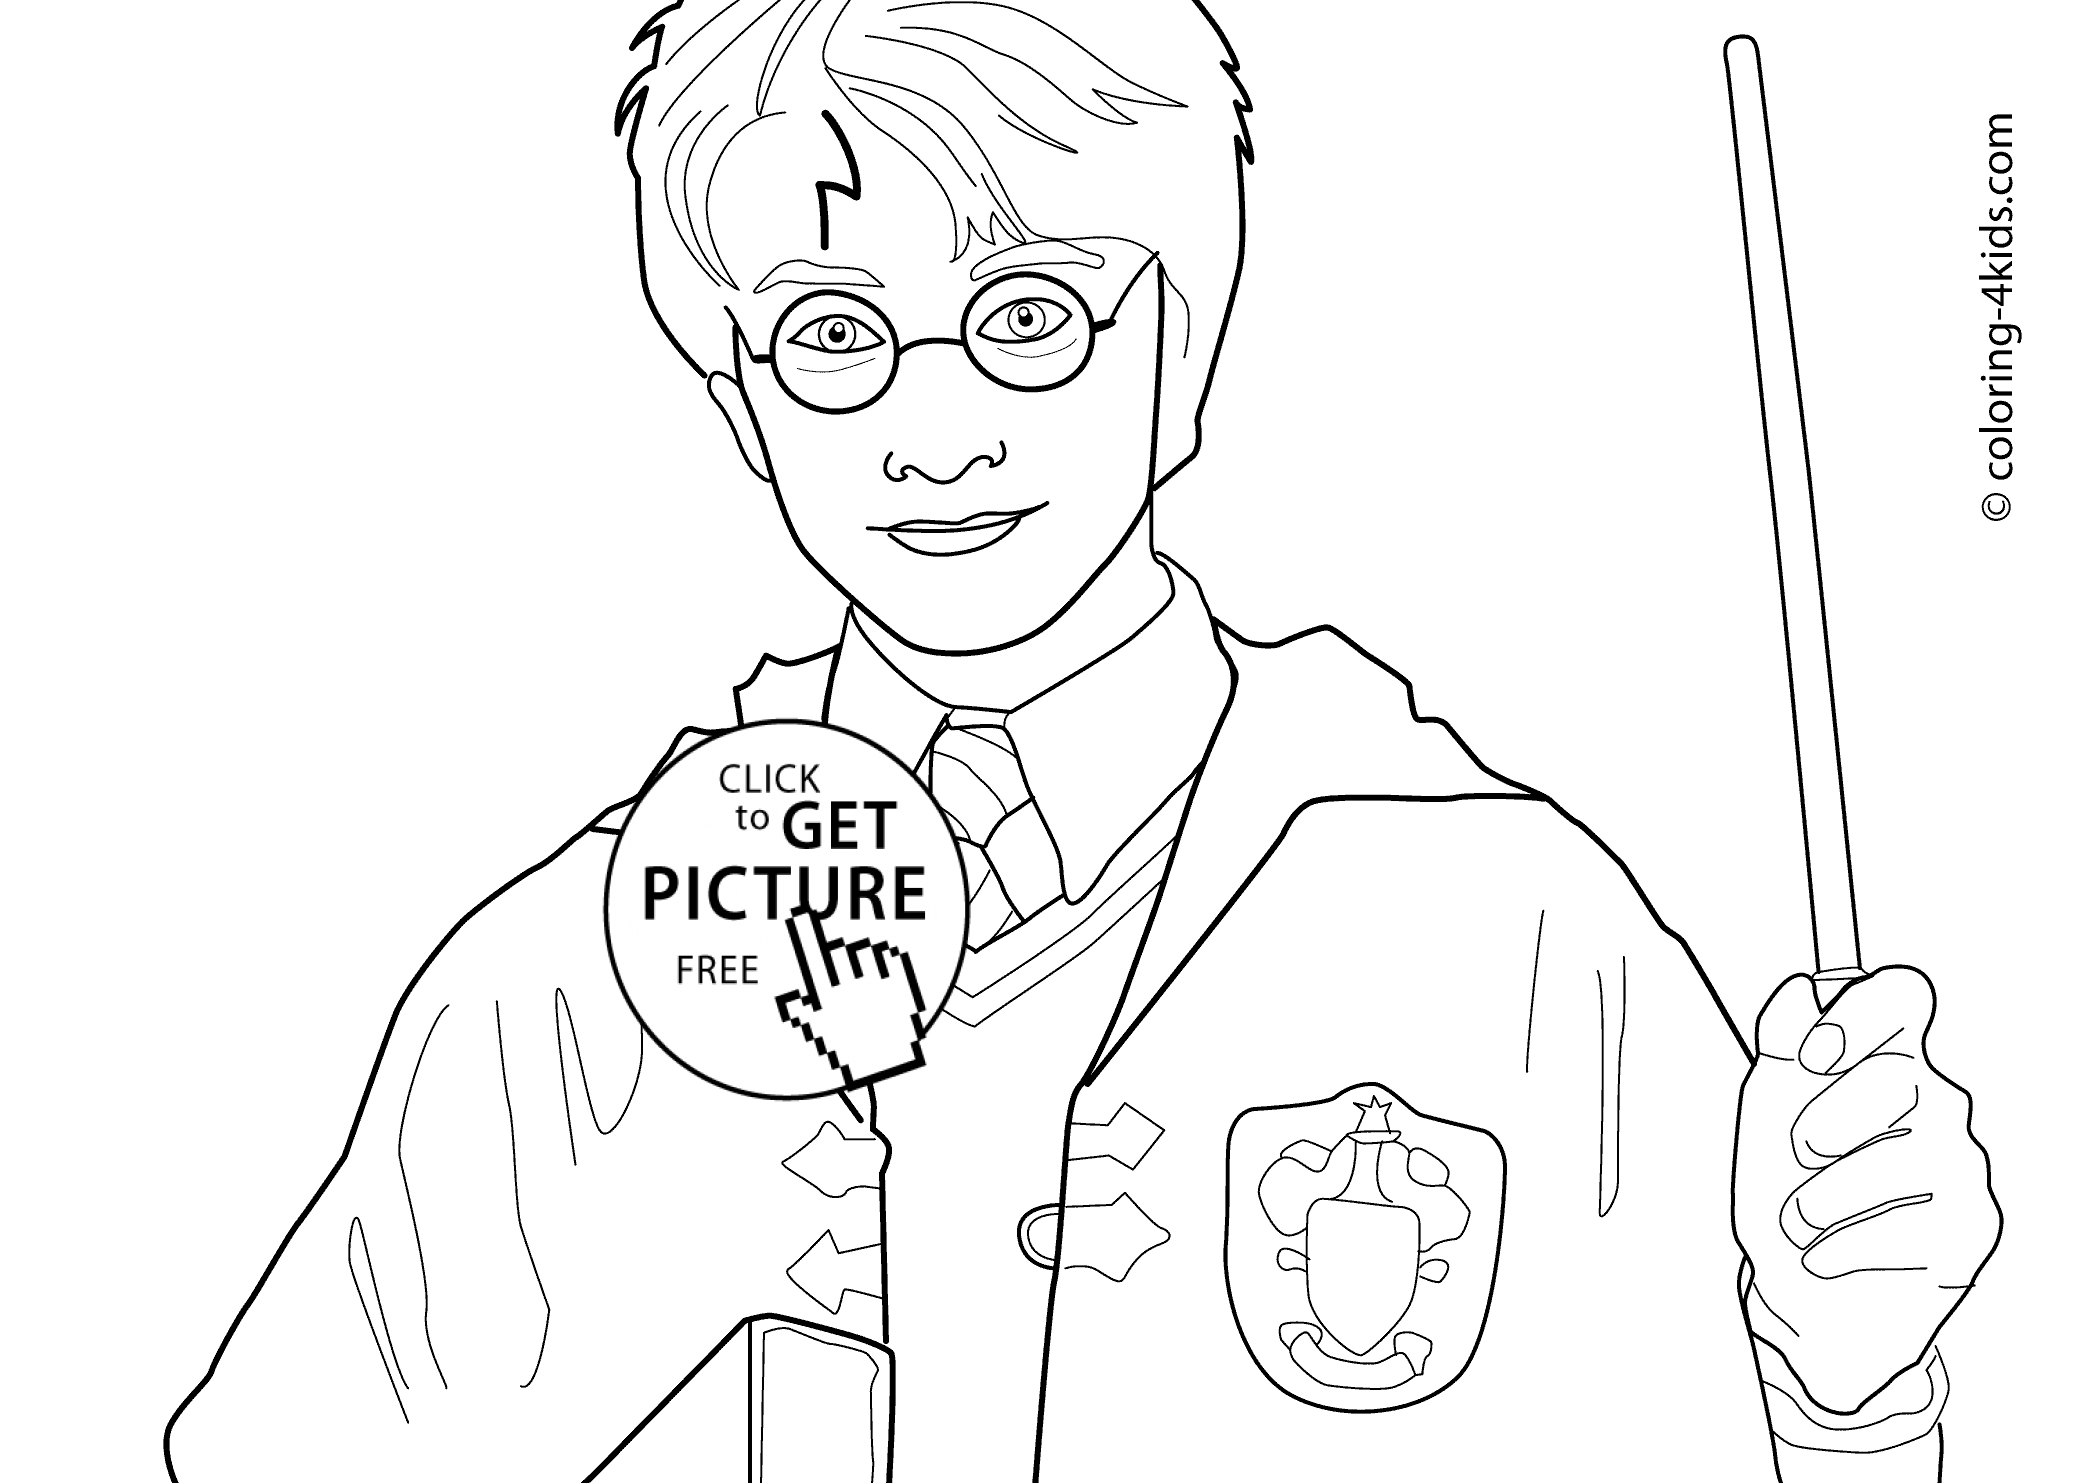 Harry Potter coloring pages for kids, printable free coloring books